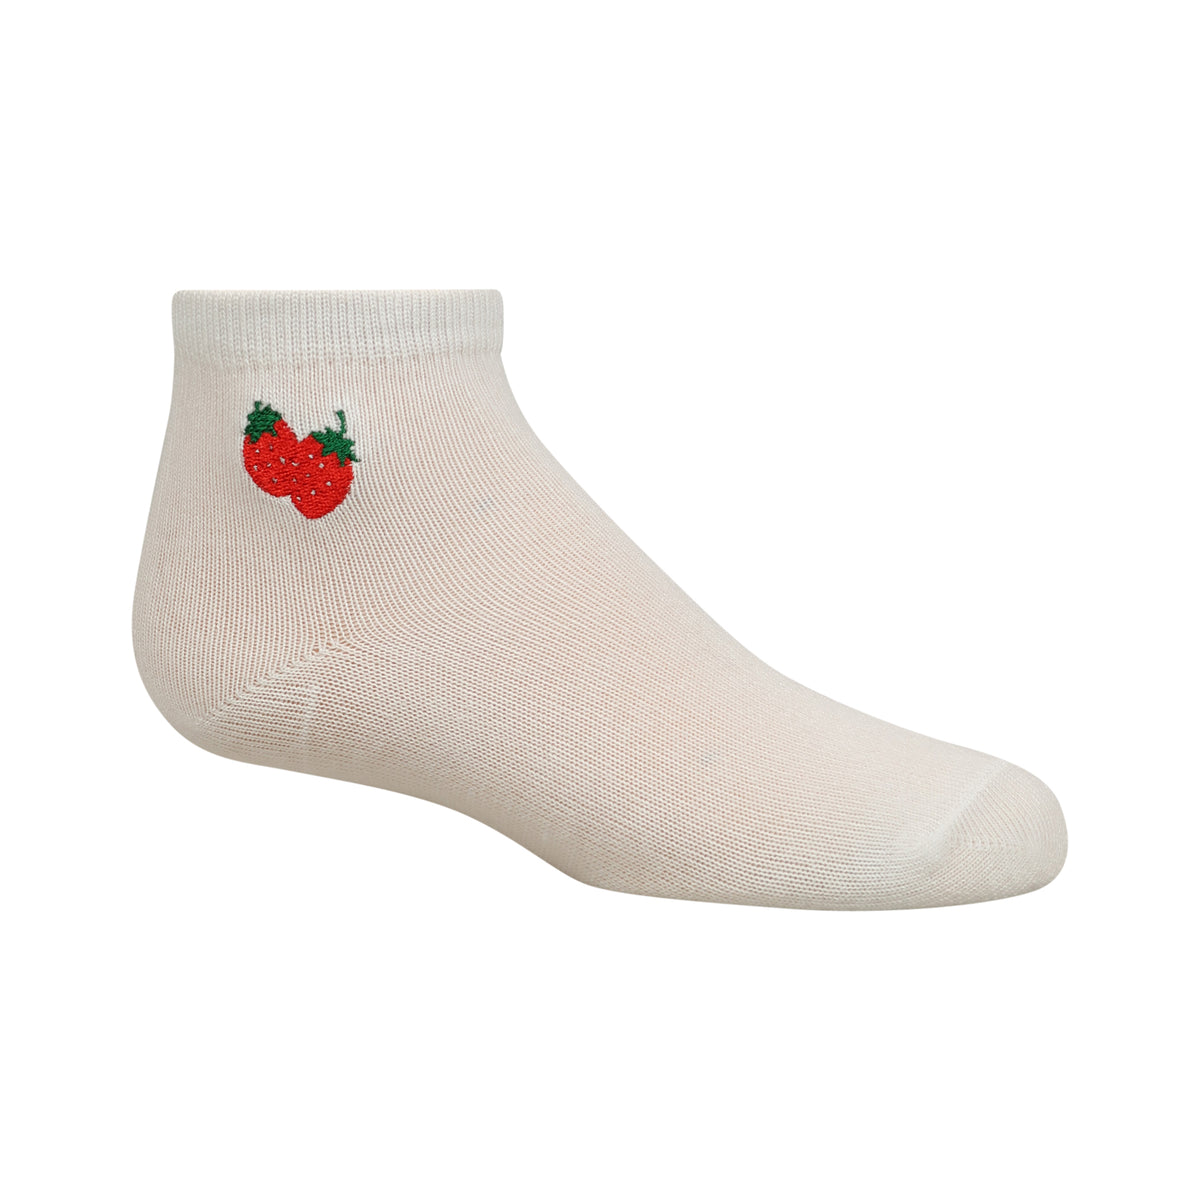 Embroidered Strawberry Ankle